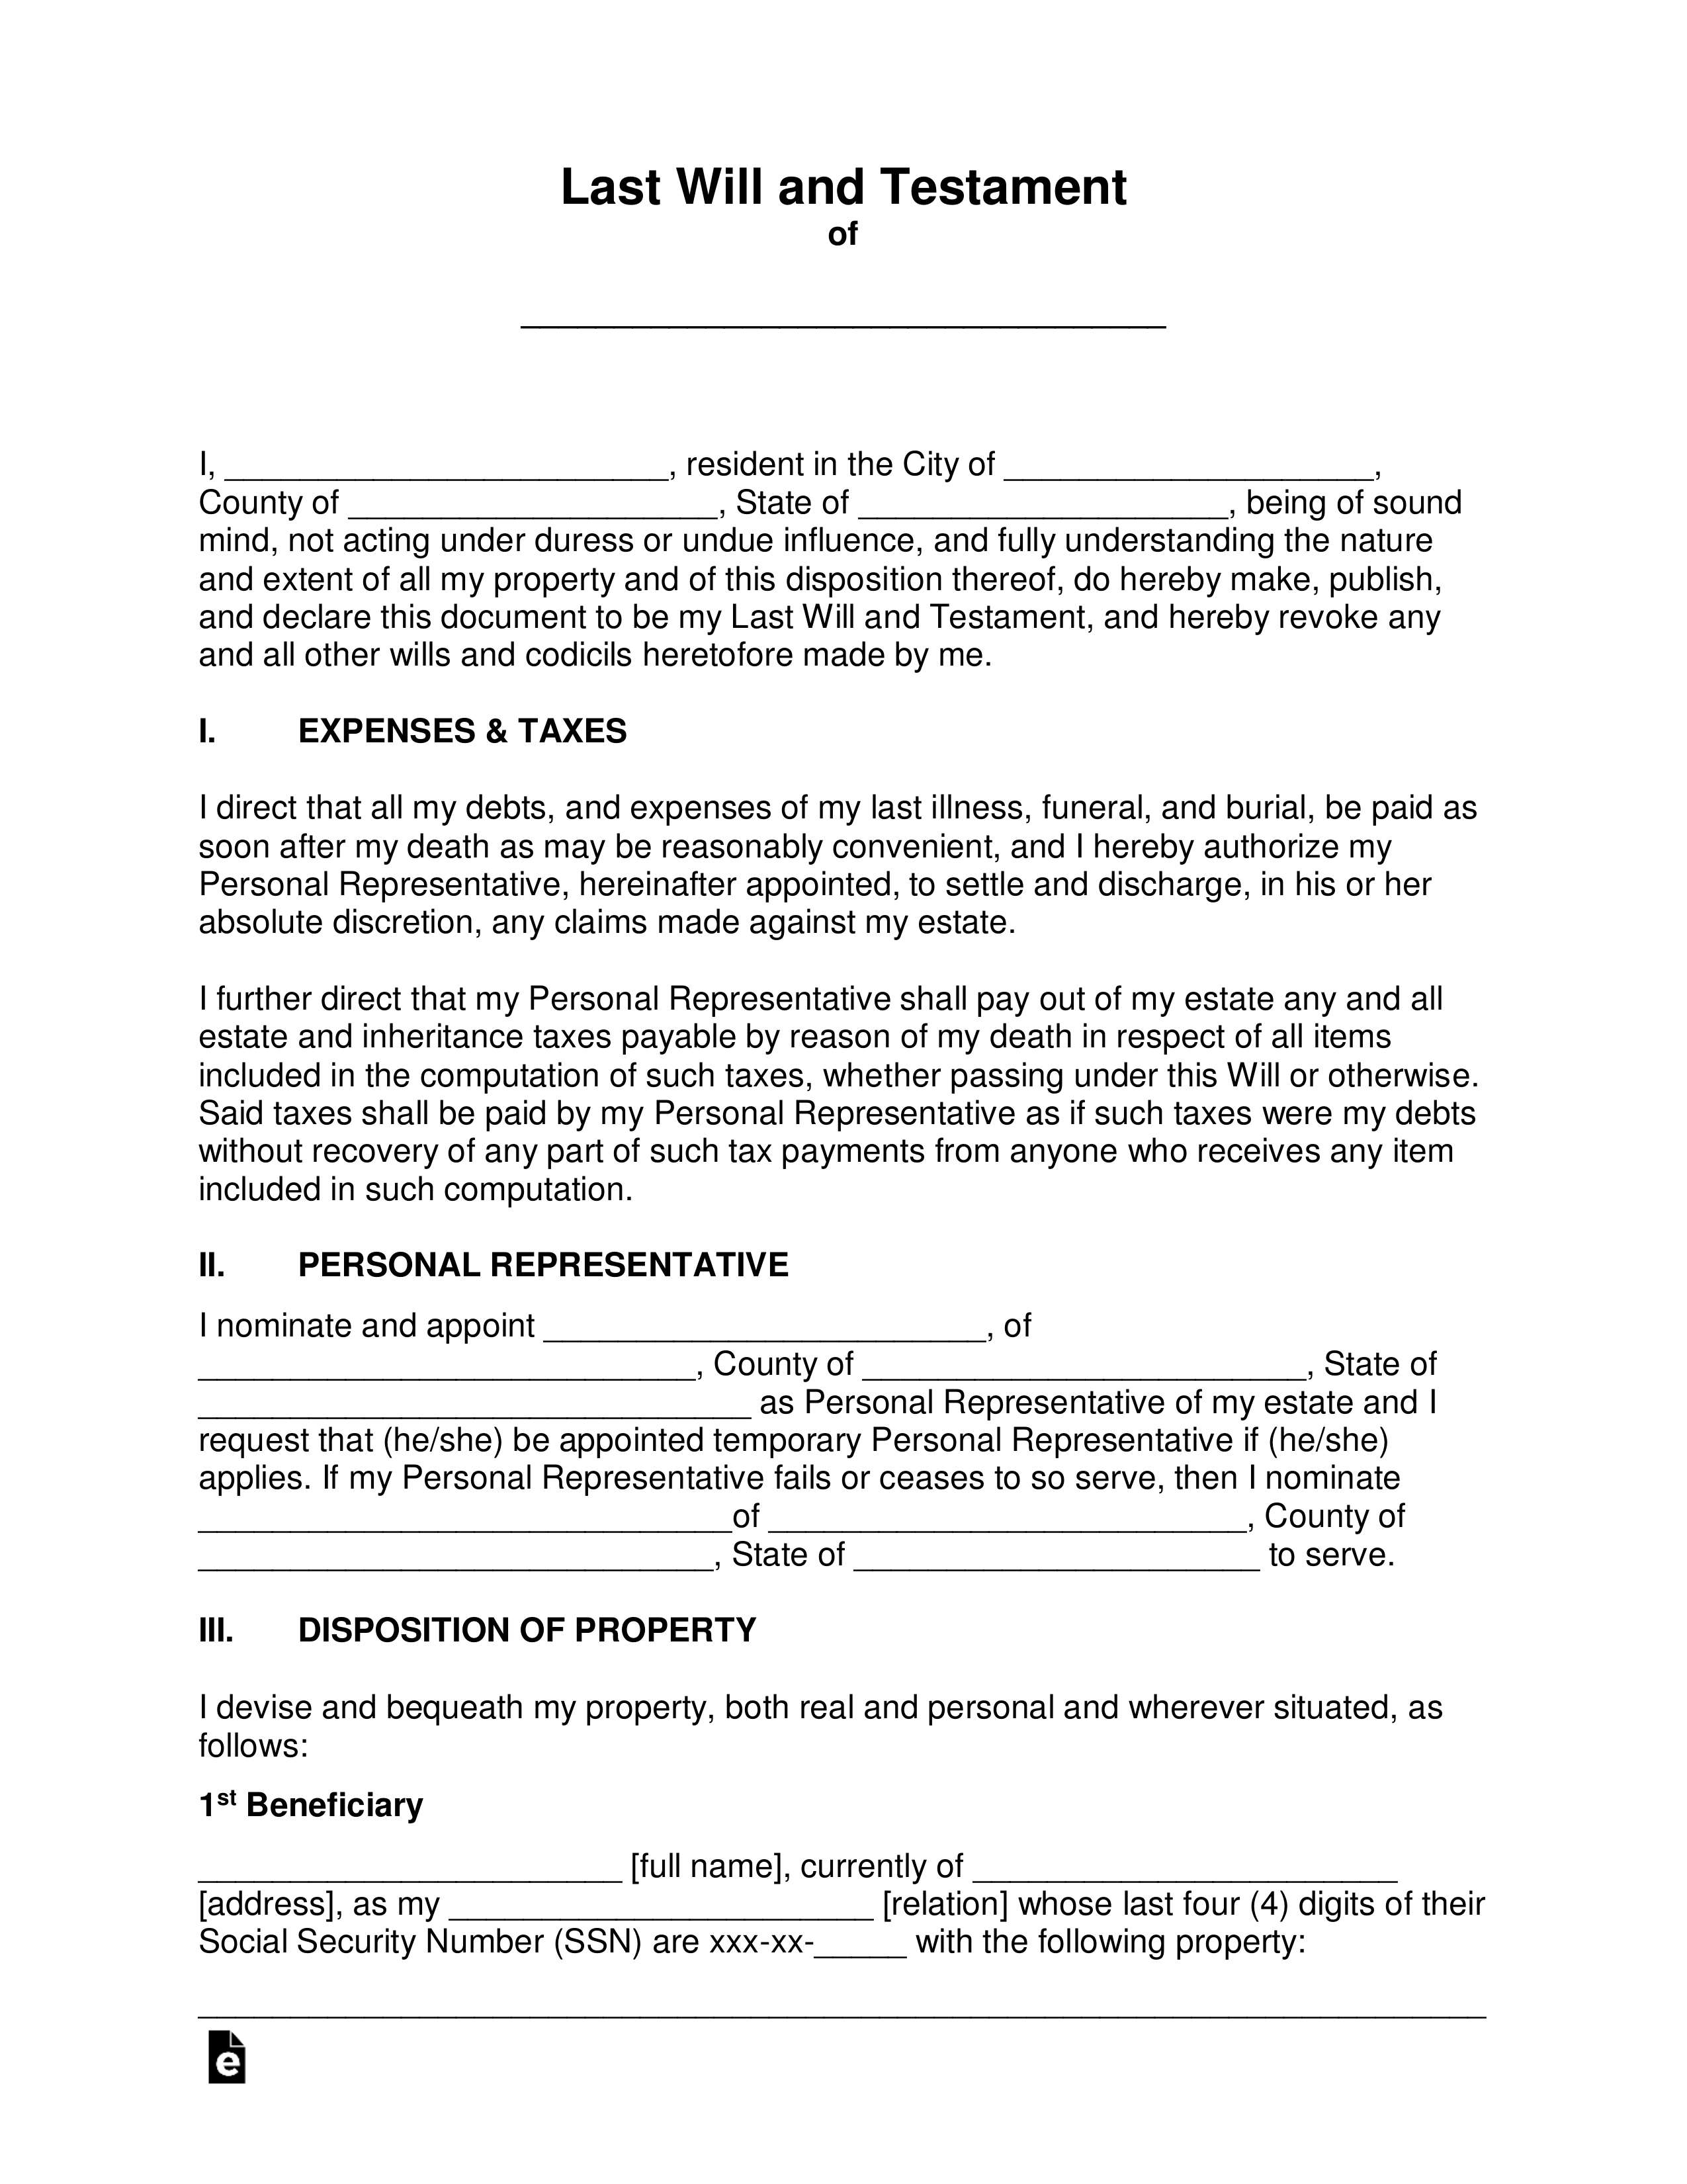 Last Will and Testament Form template